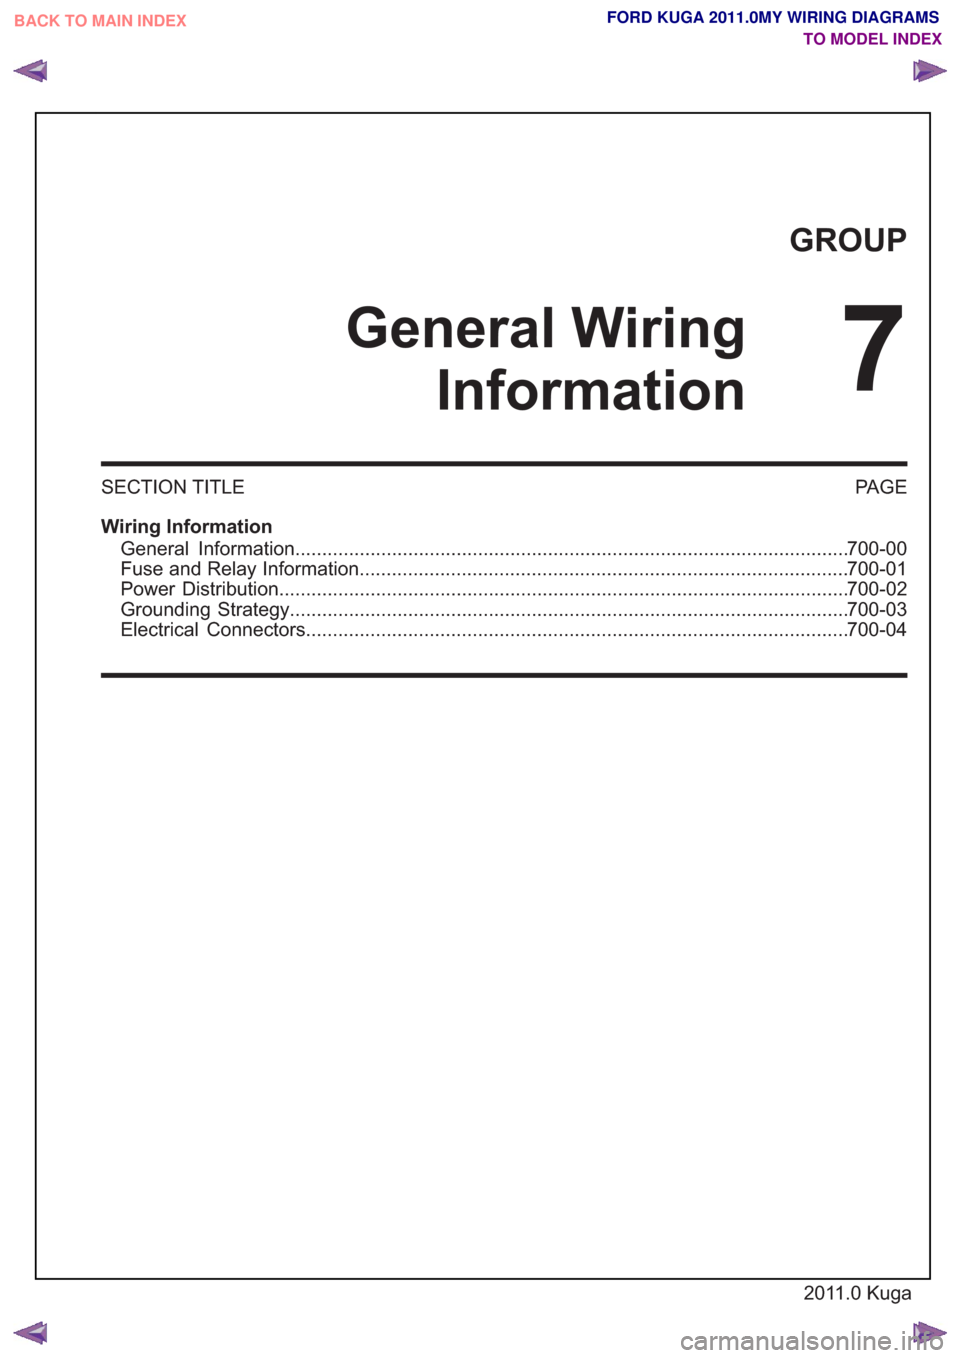 FORD KUGA 2011 1.G Wiring Diagram Workshop Manual GROUP
General WiringInformation
7
SECTION TITLE PAGE
Wiring Information General Information.............................................................\
..........................................700-